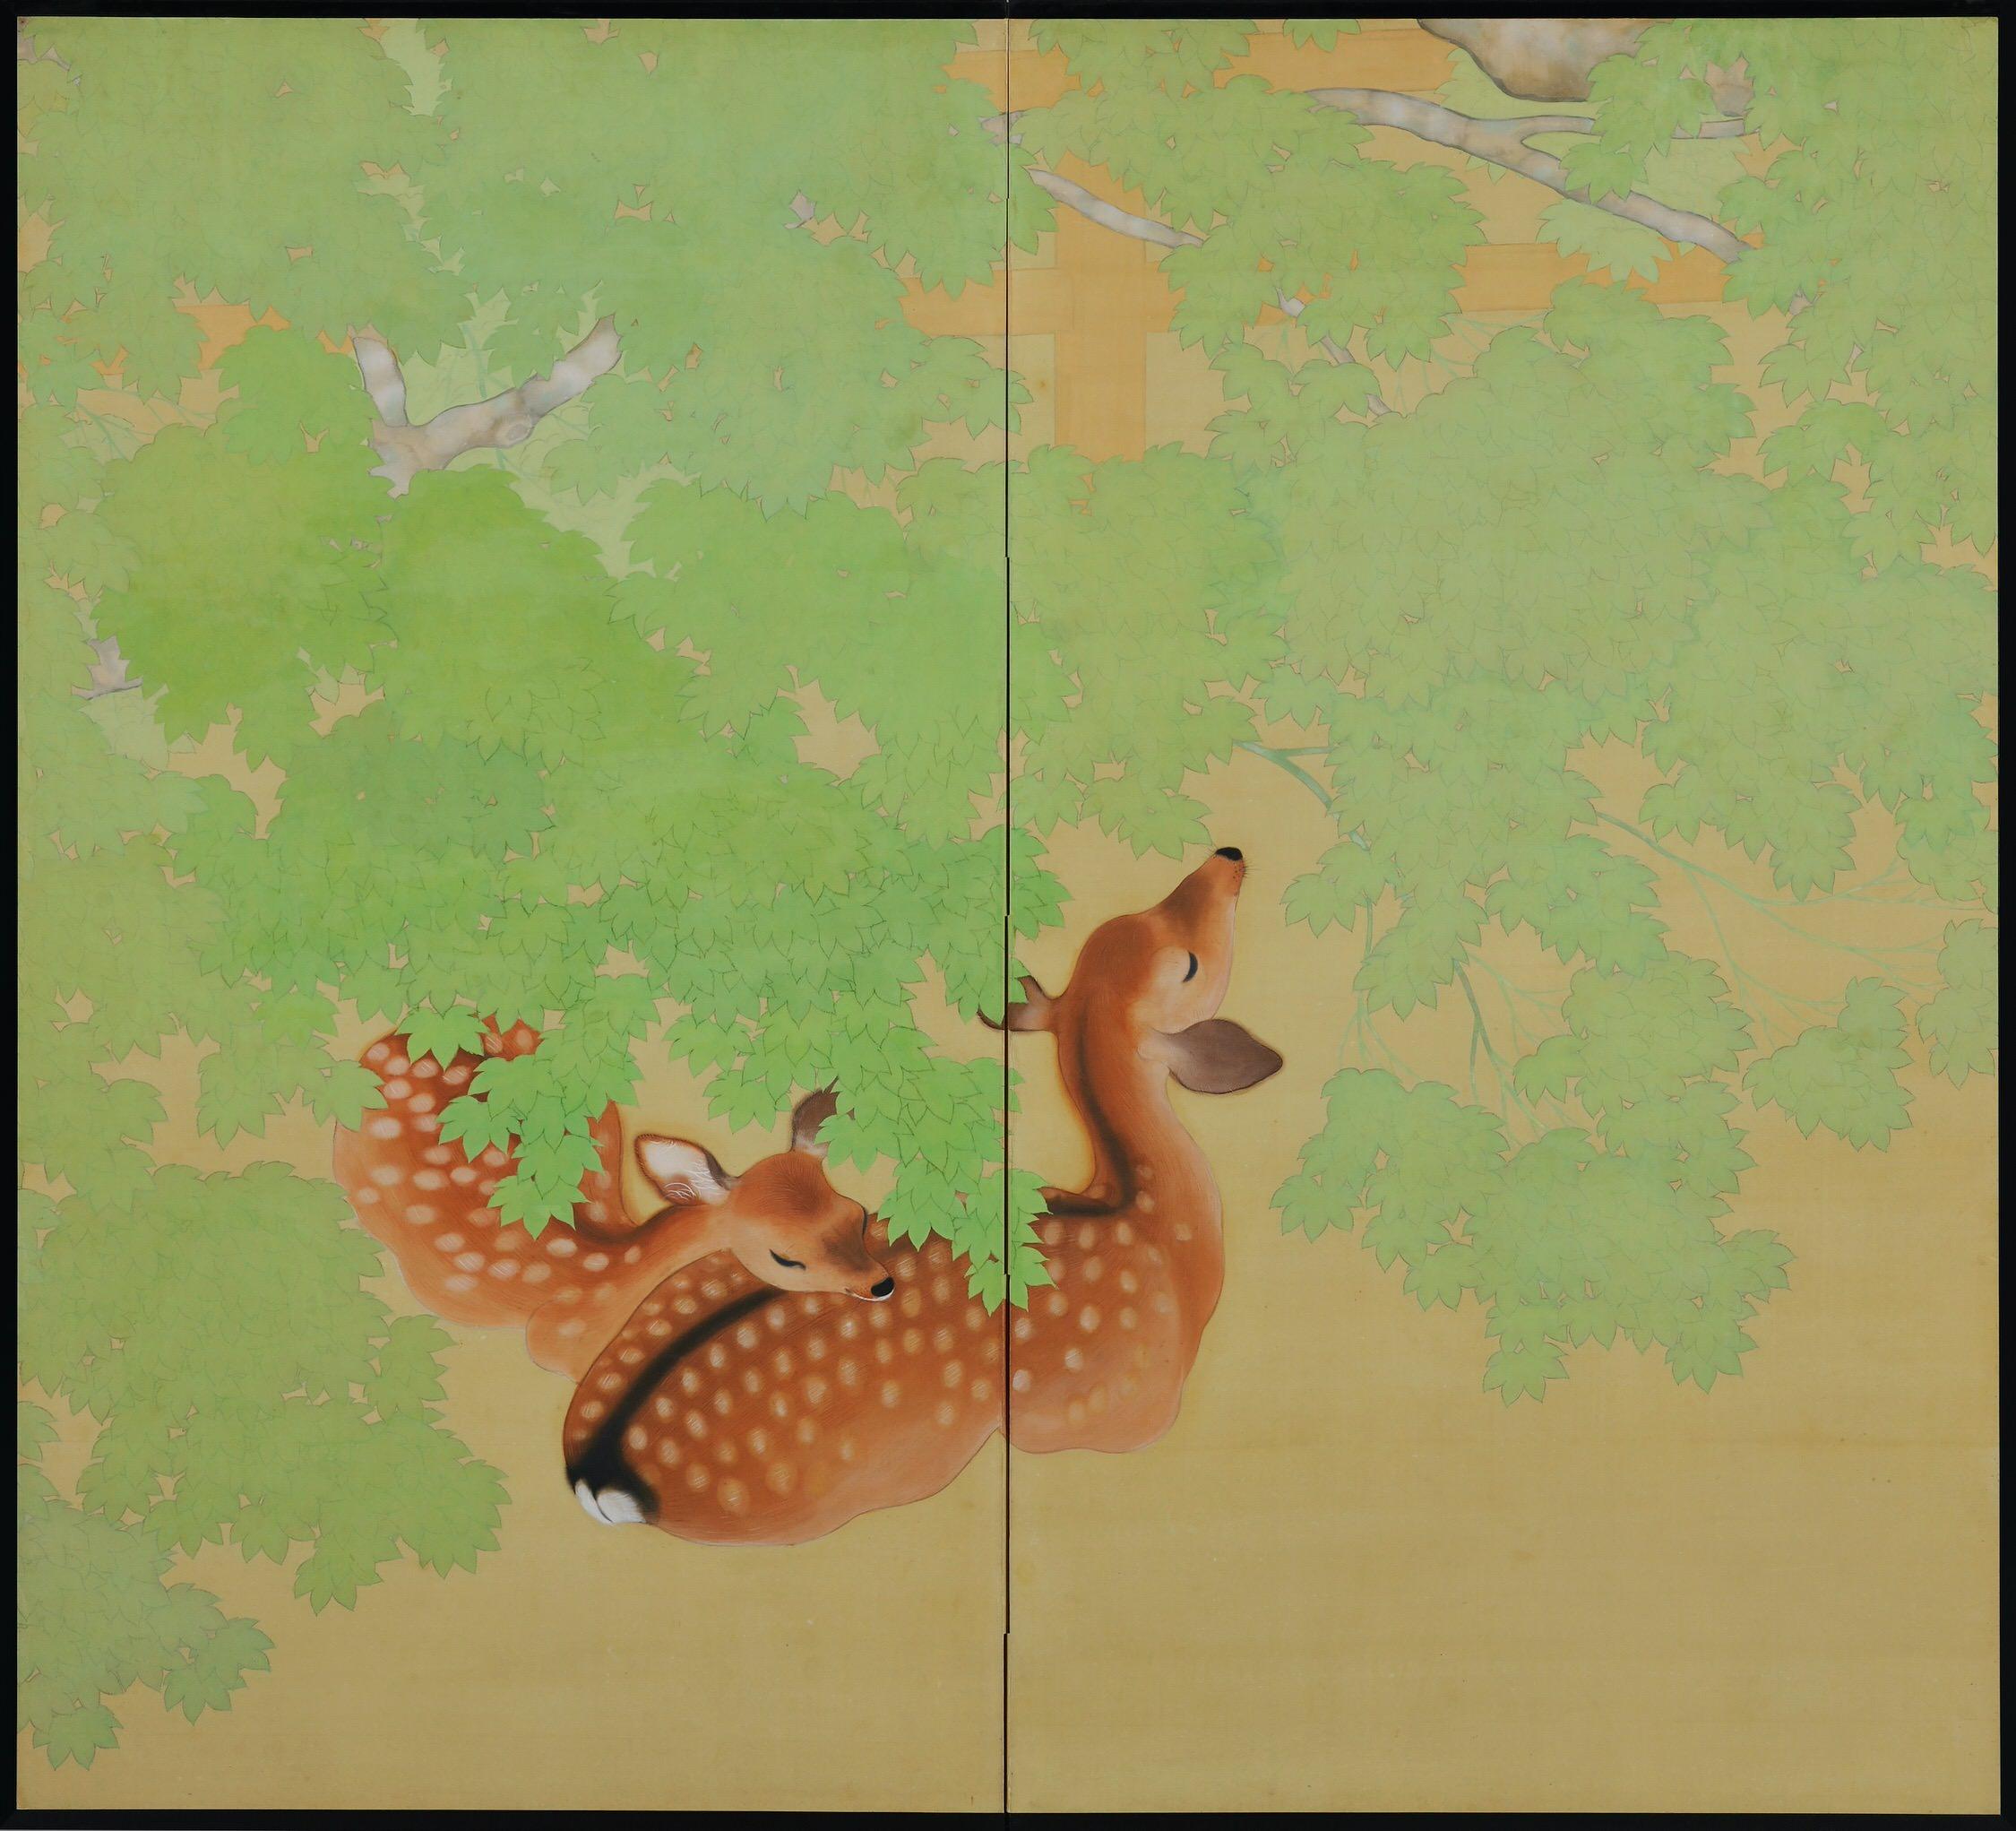 Deer under maples

Late Taisho period, circa 1925-1930

Pair of two-panel screens. Ink and pigment on silk.

Signature: Goho

Seal: Goho

A pair of two-fold Japanese silk screens from the later Taisho period depicting deer under maple